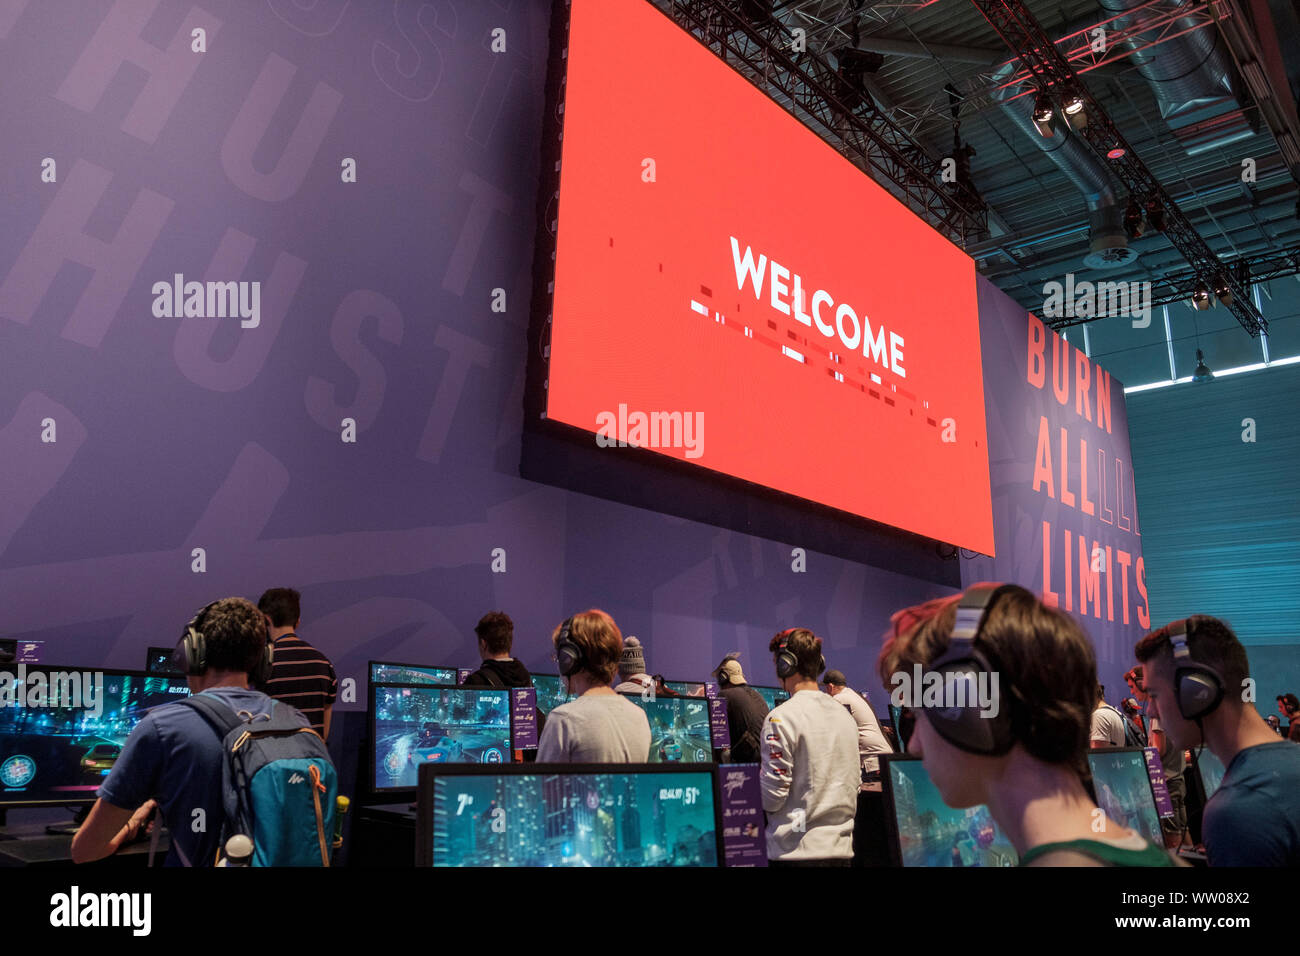 visitors play car racing game  below large screen displaying the word „Welcome“ at gamescom , world’s largest trade fair for computer and video games in Cologne, Germany on  August 21, 2019 Stock Photo